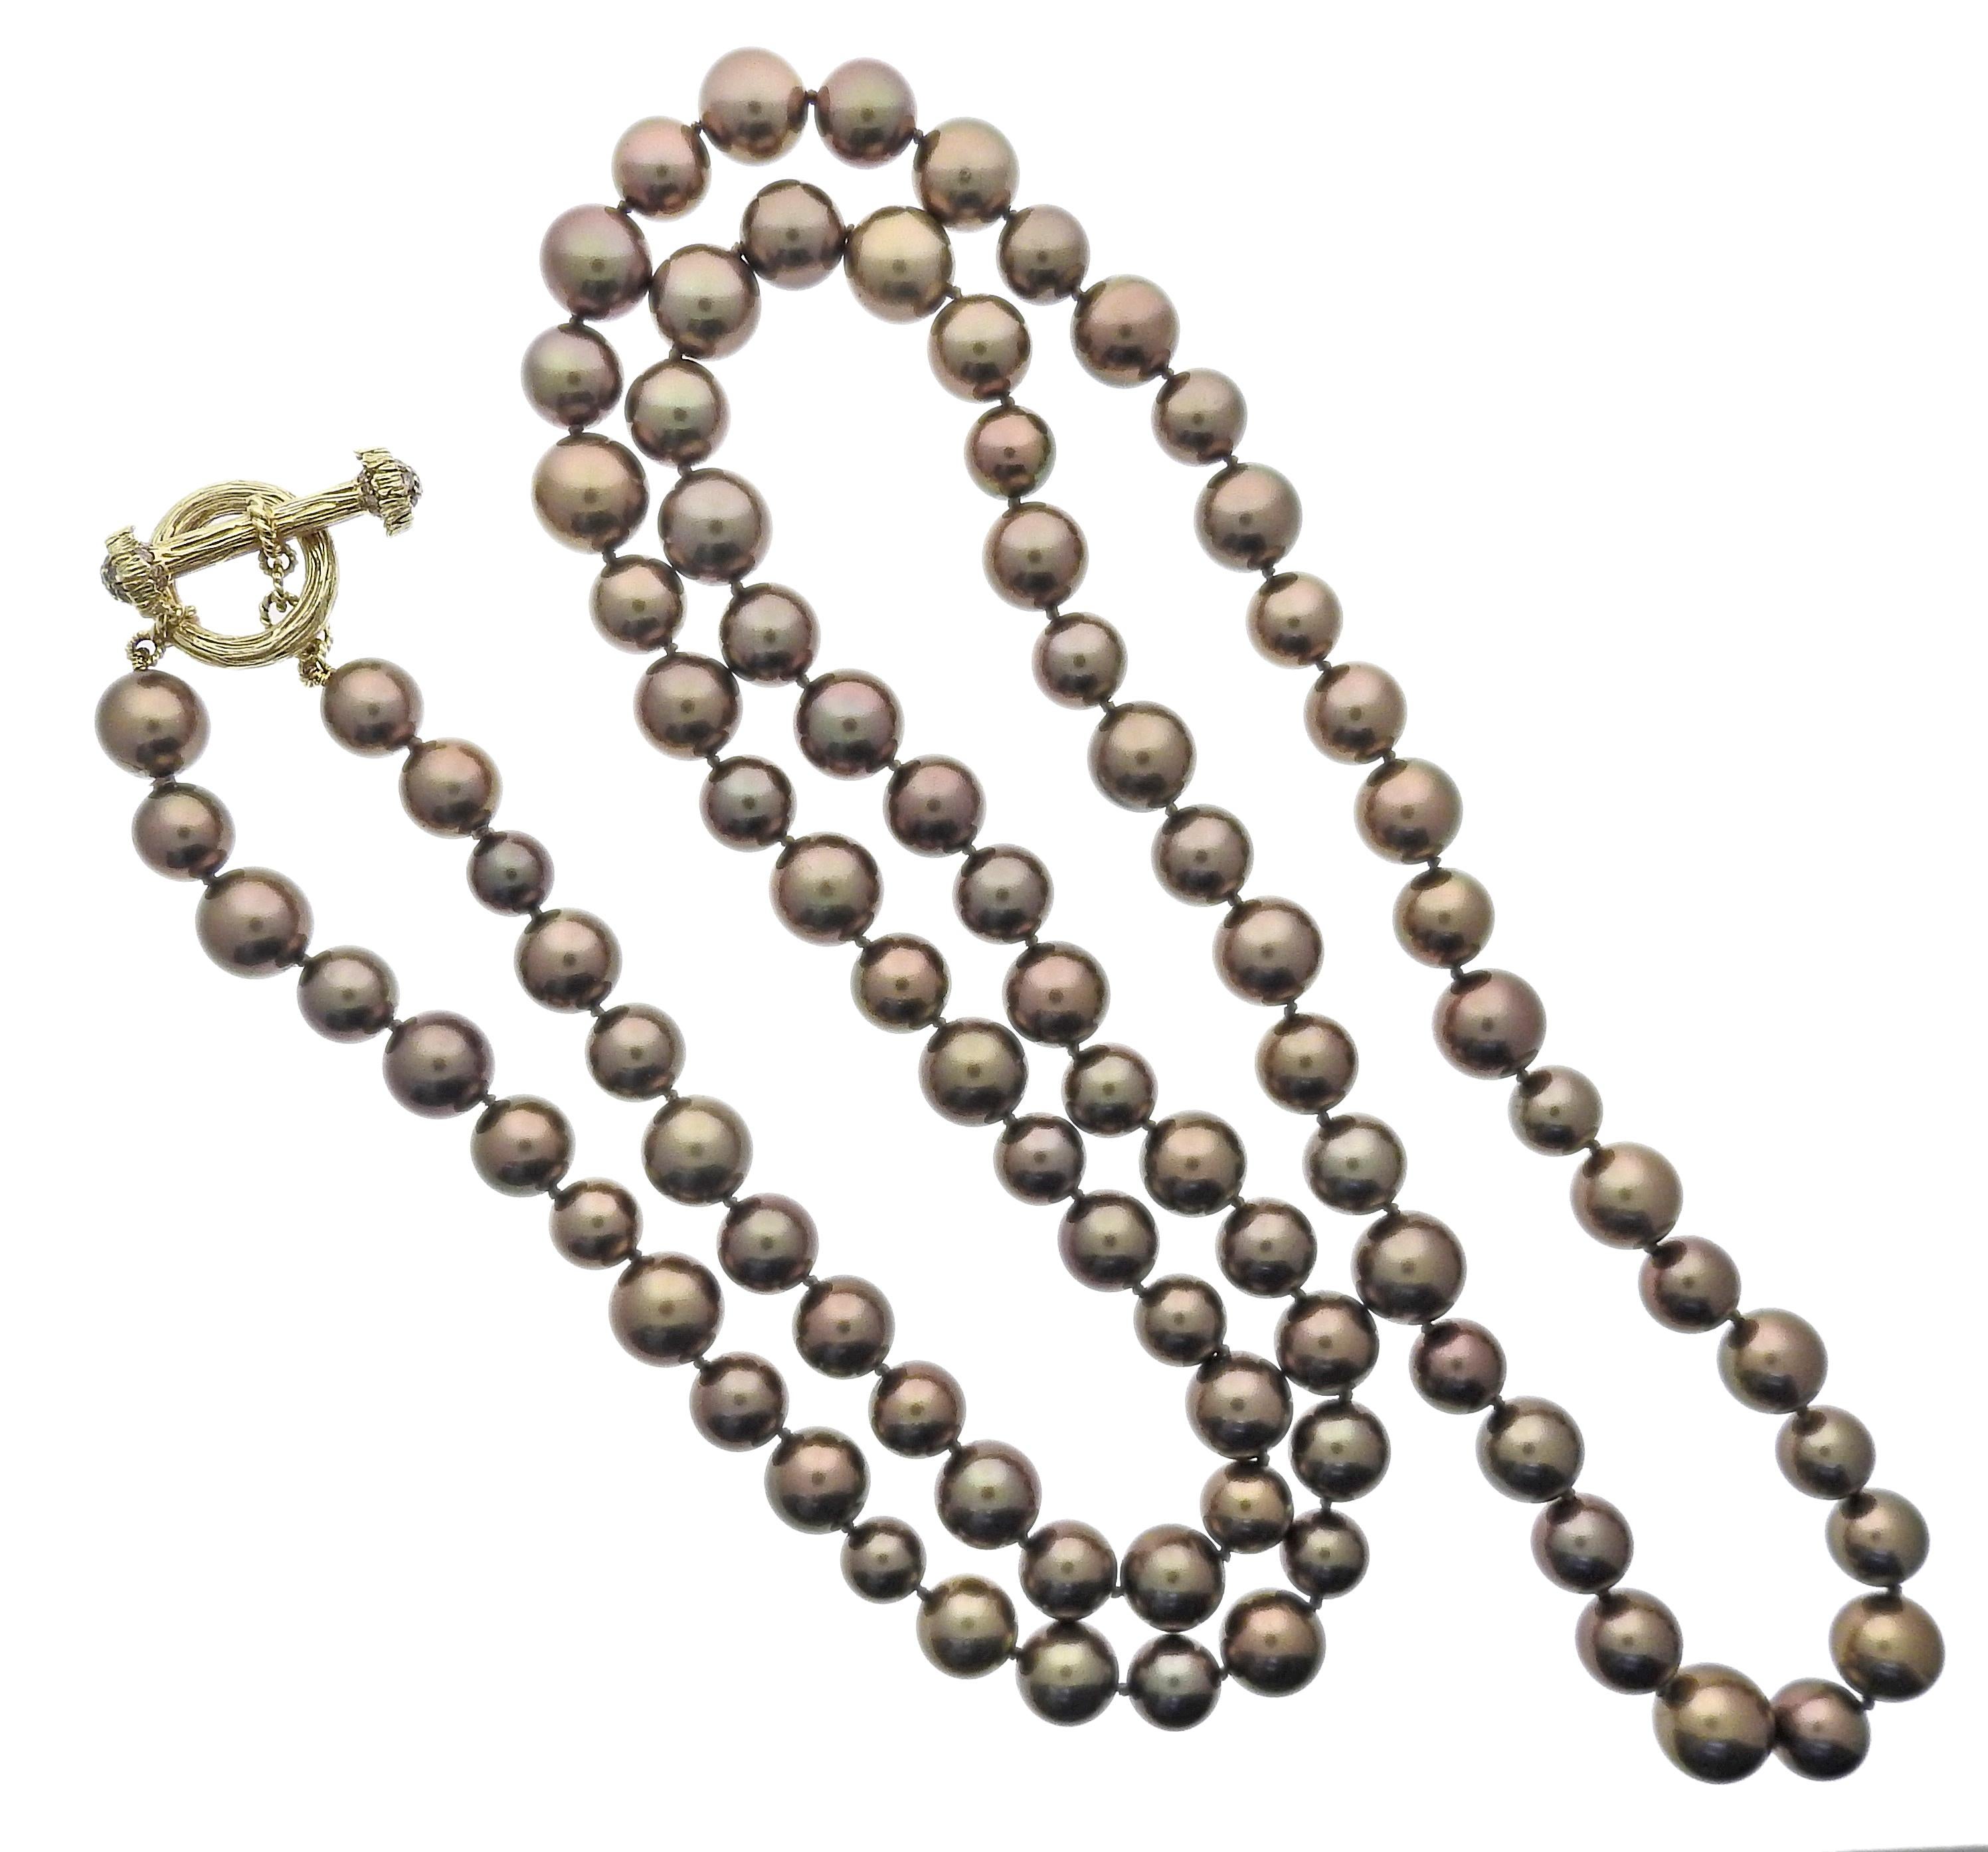 18k gold toggle long necklace by Mish New York, with 8.5mm to 10mm chocolate pearls and approx. 0.18ctw fancy diamonds on the clasp. Necklace is 38